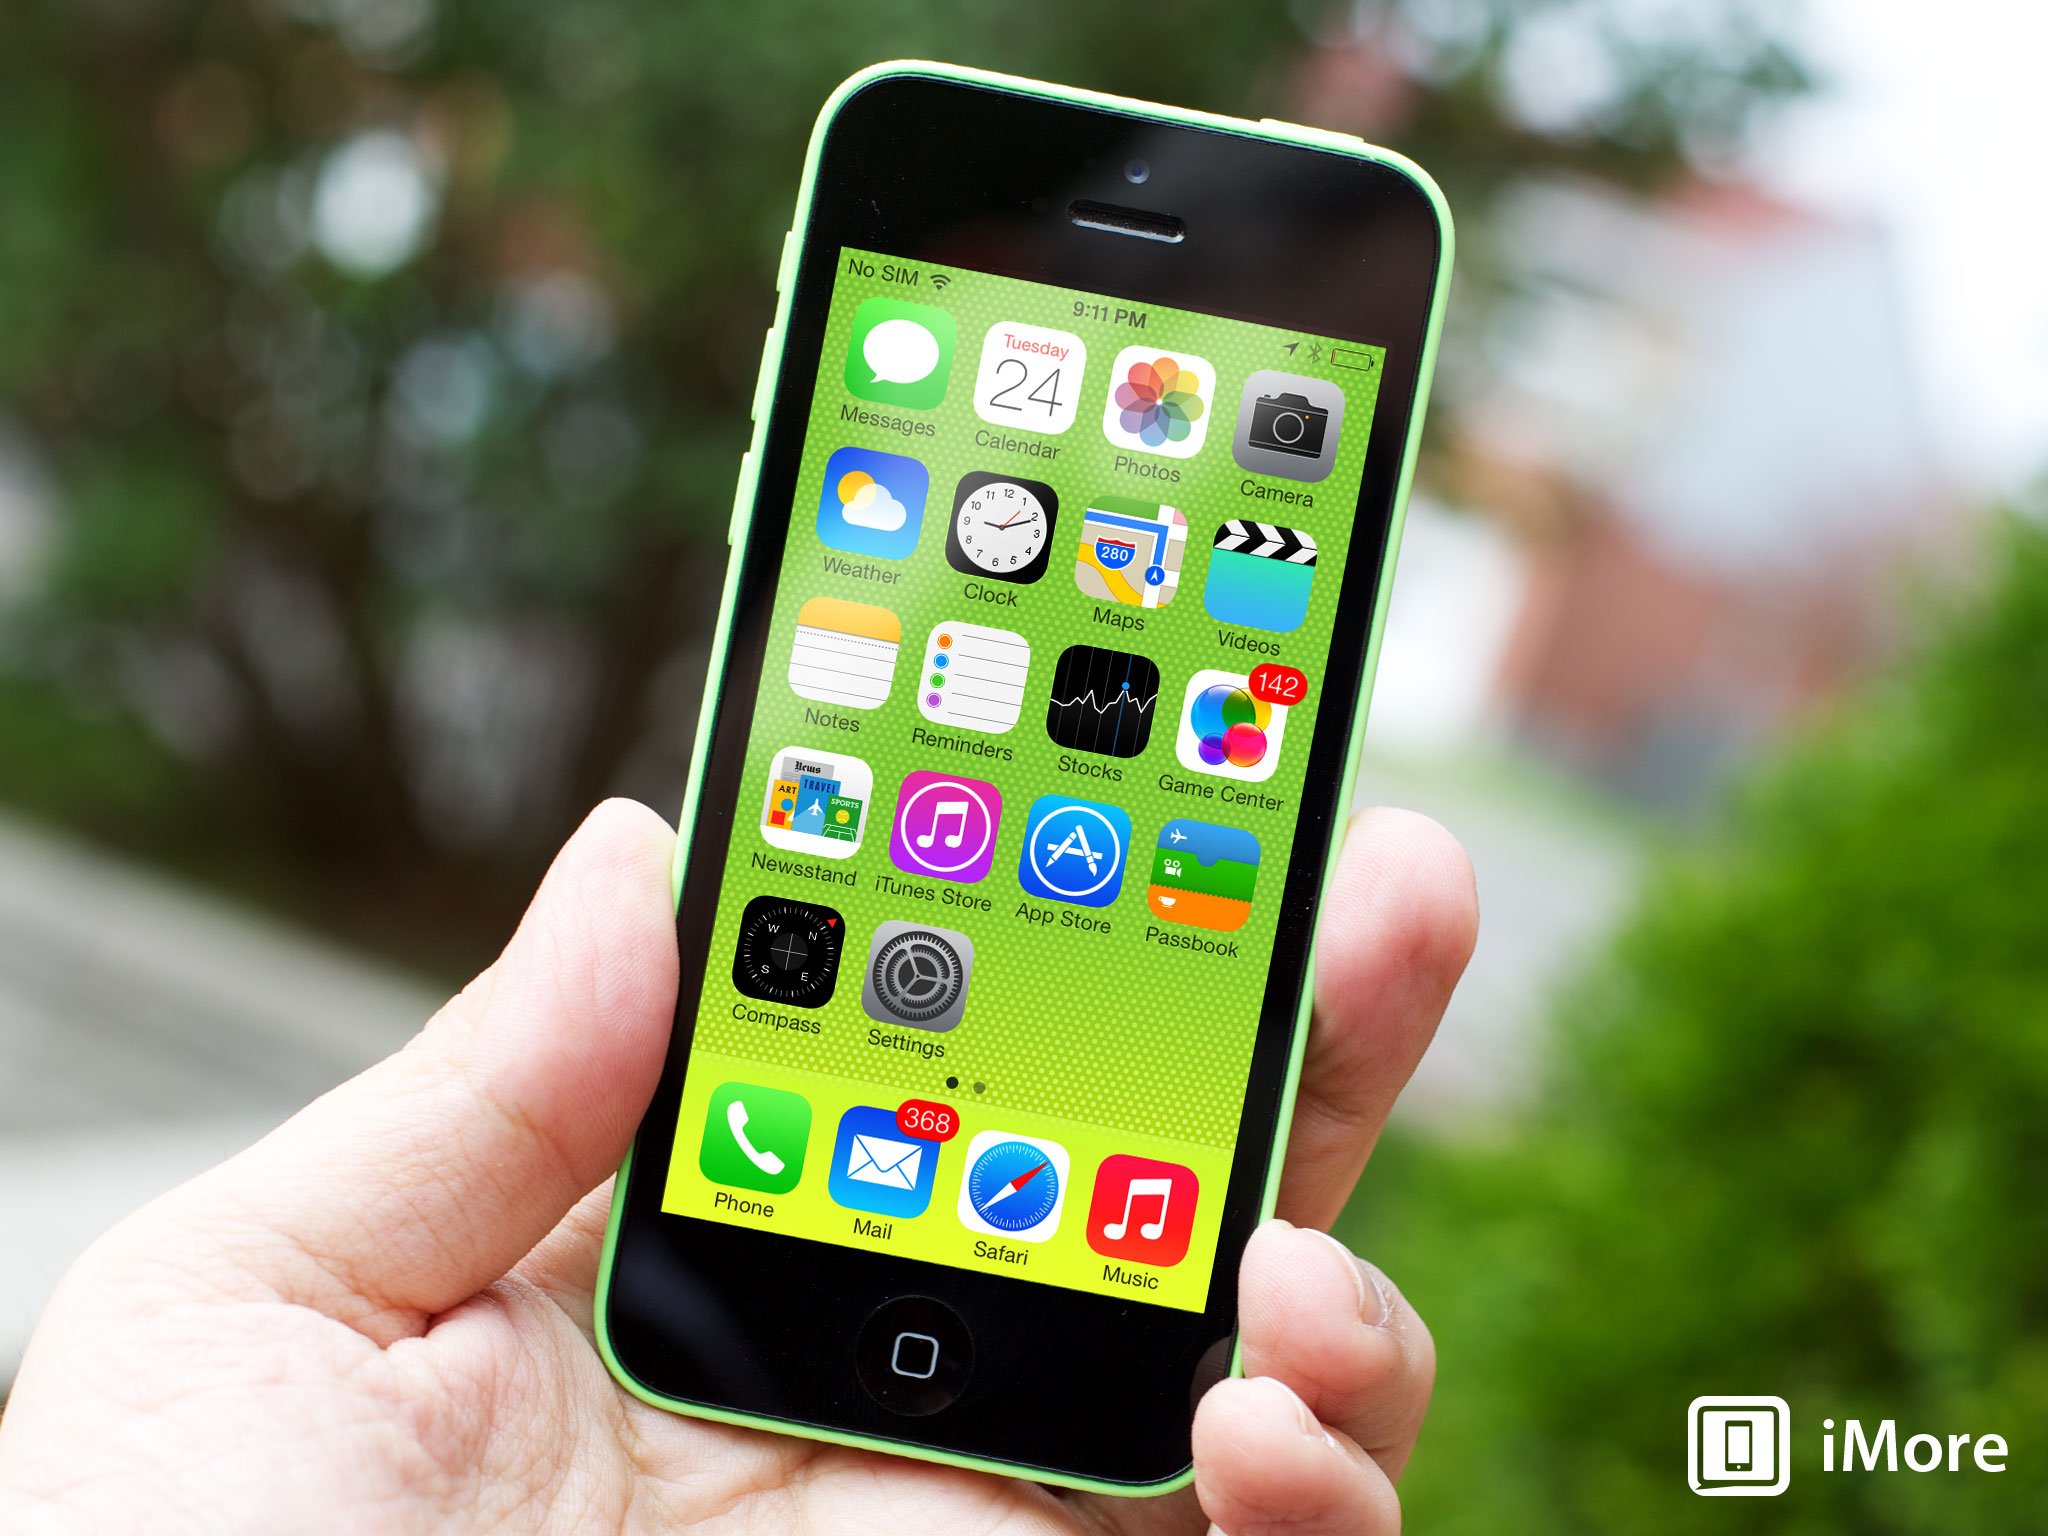 How can Apple avoid another iPhone 5c?